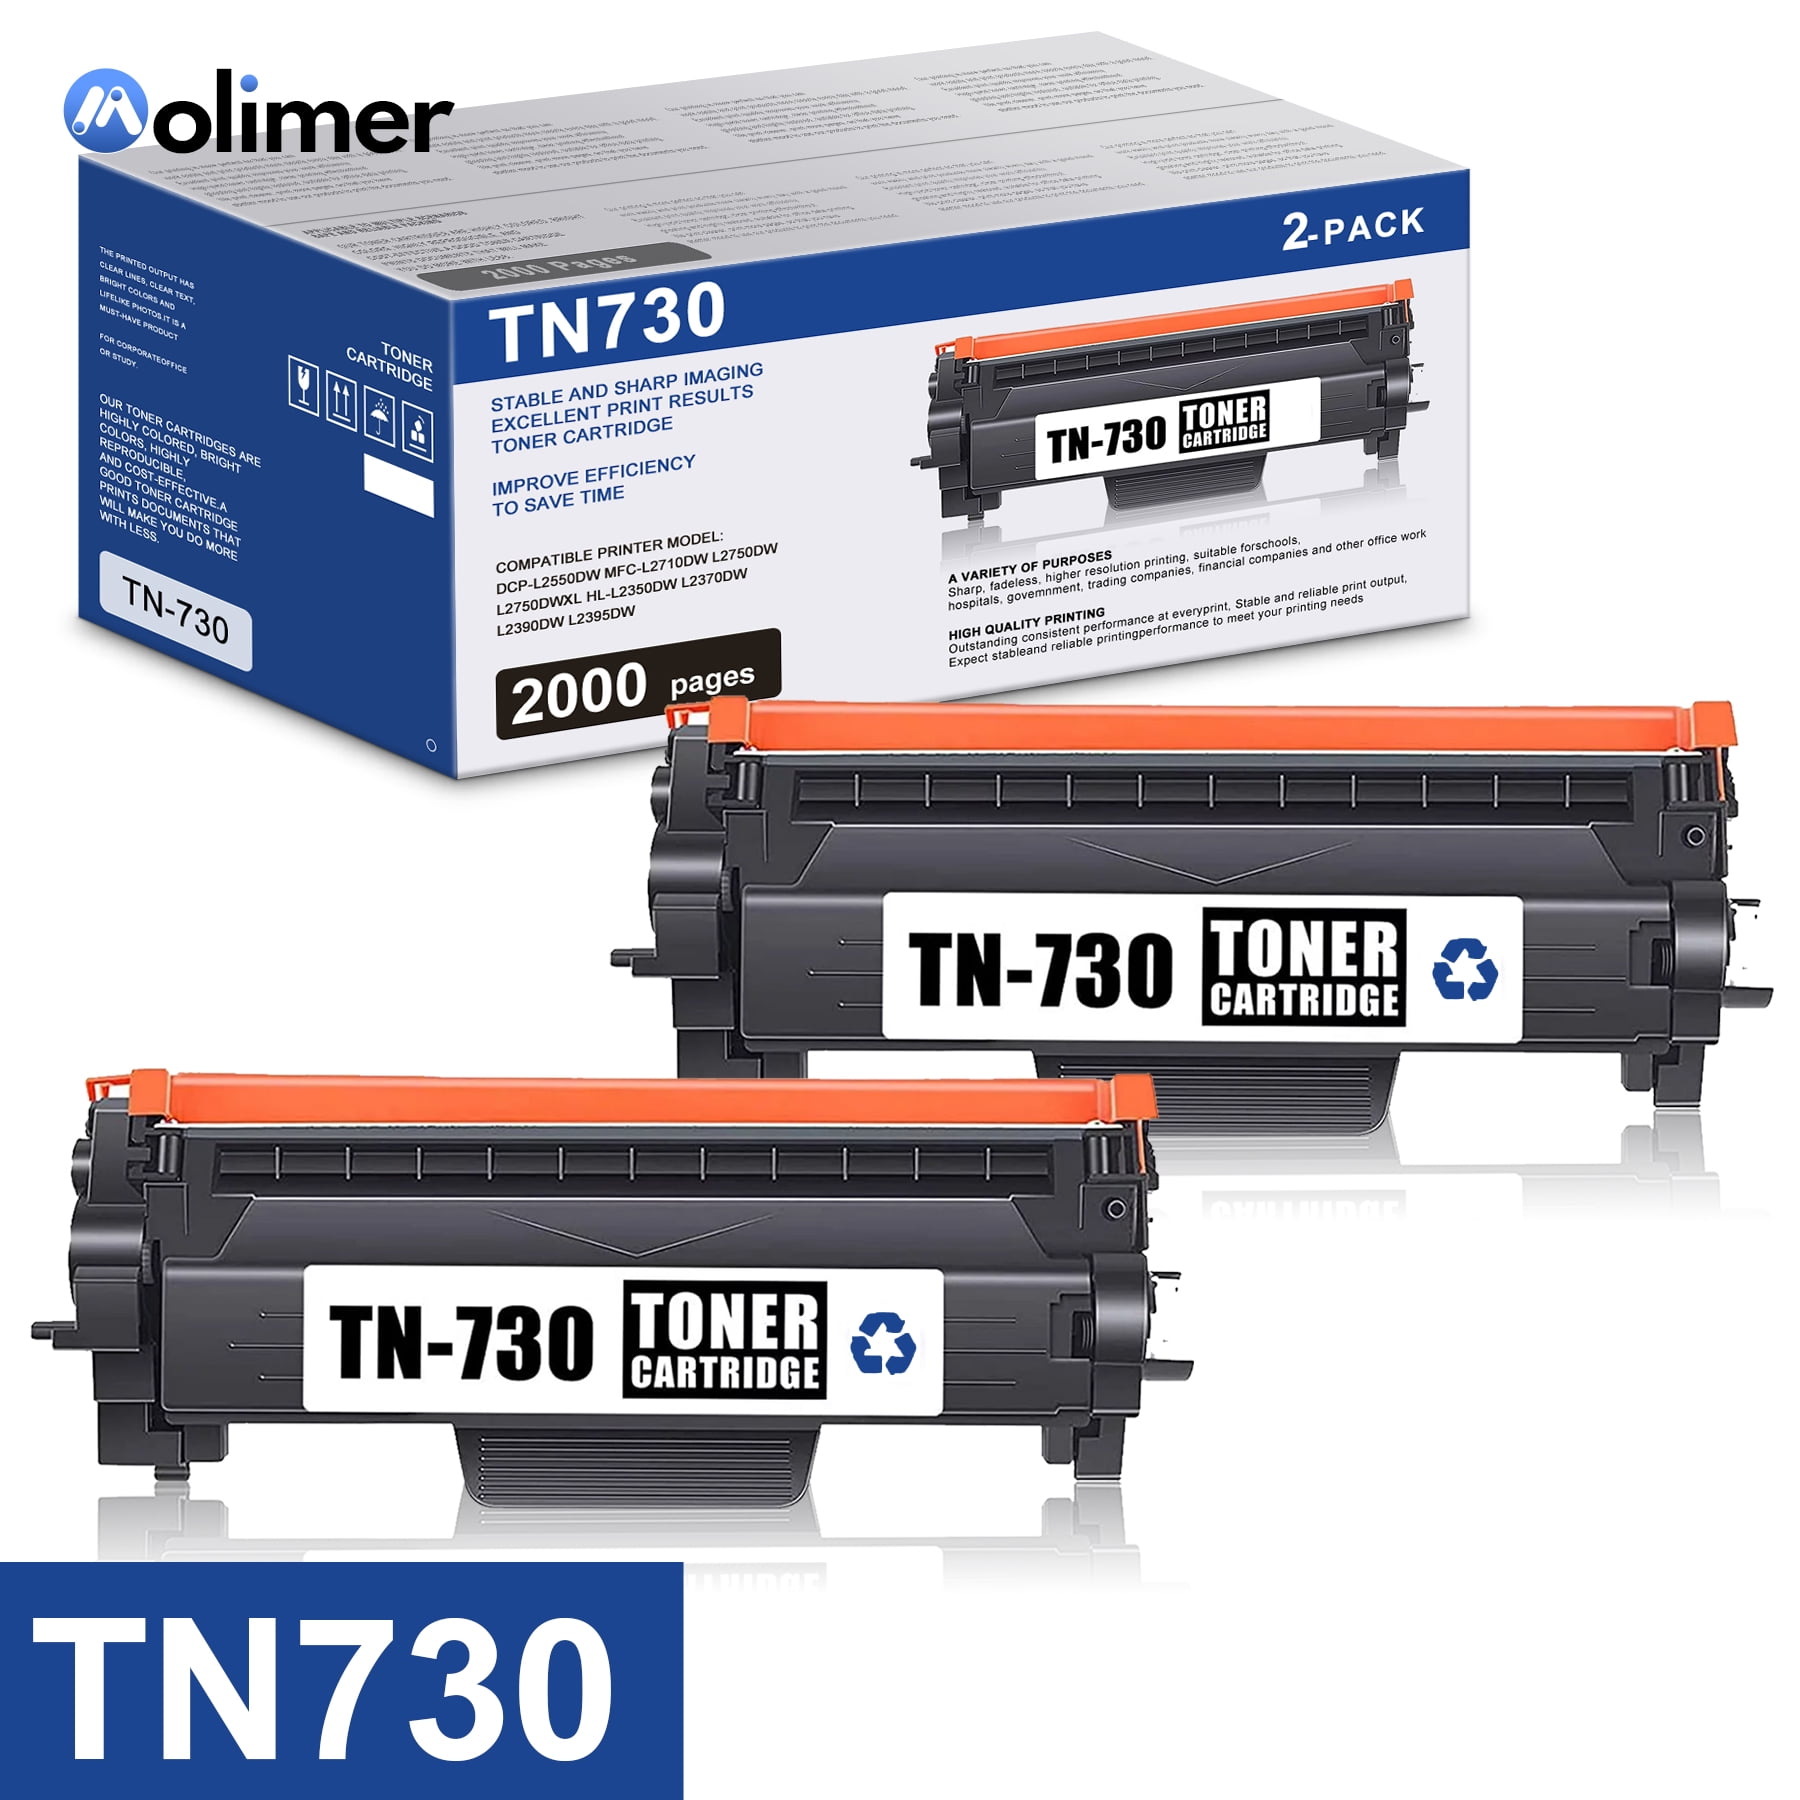 TN730 Black Toner Cartridge Replacement for Brother MFC-L2710DW Printer,  2-Pack 